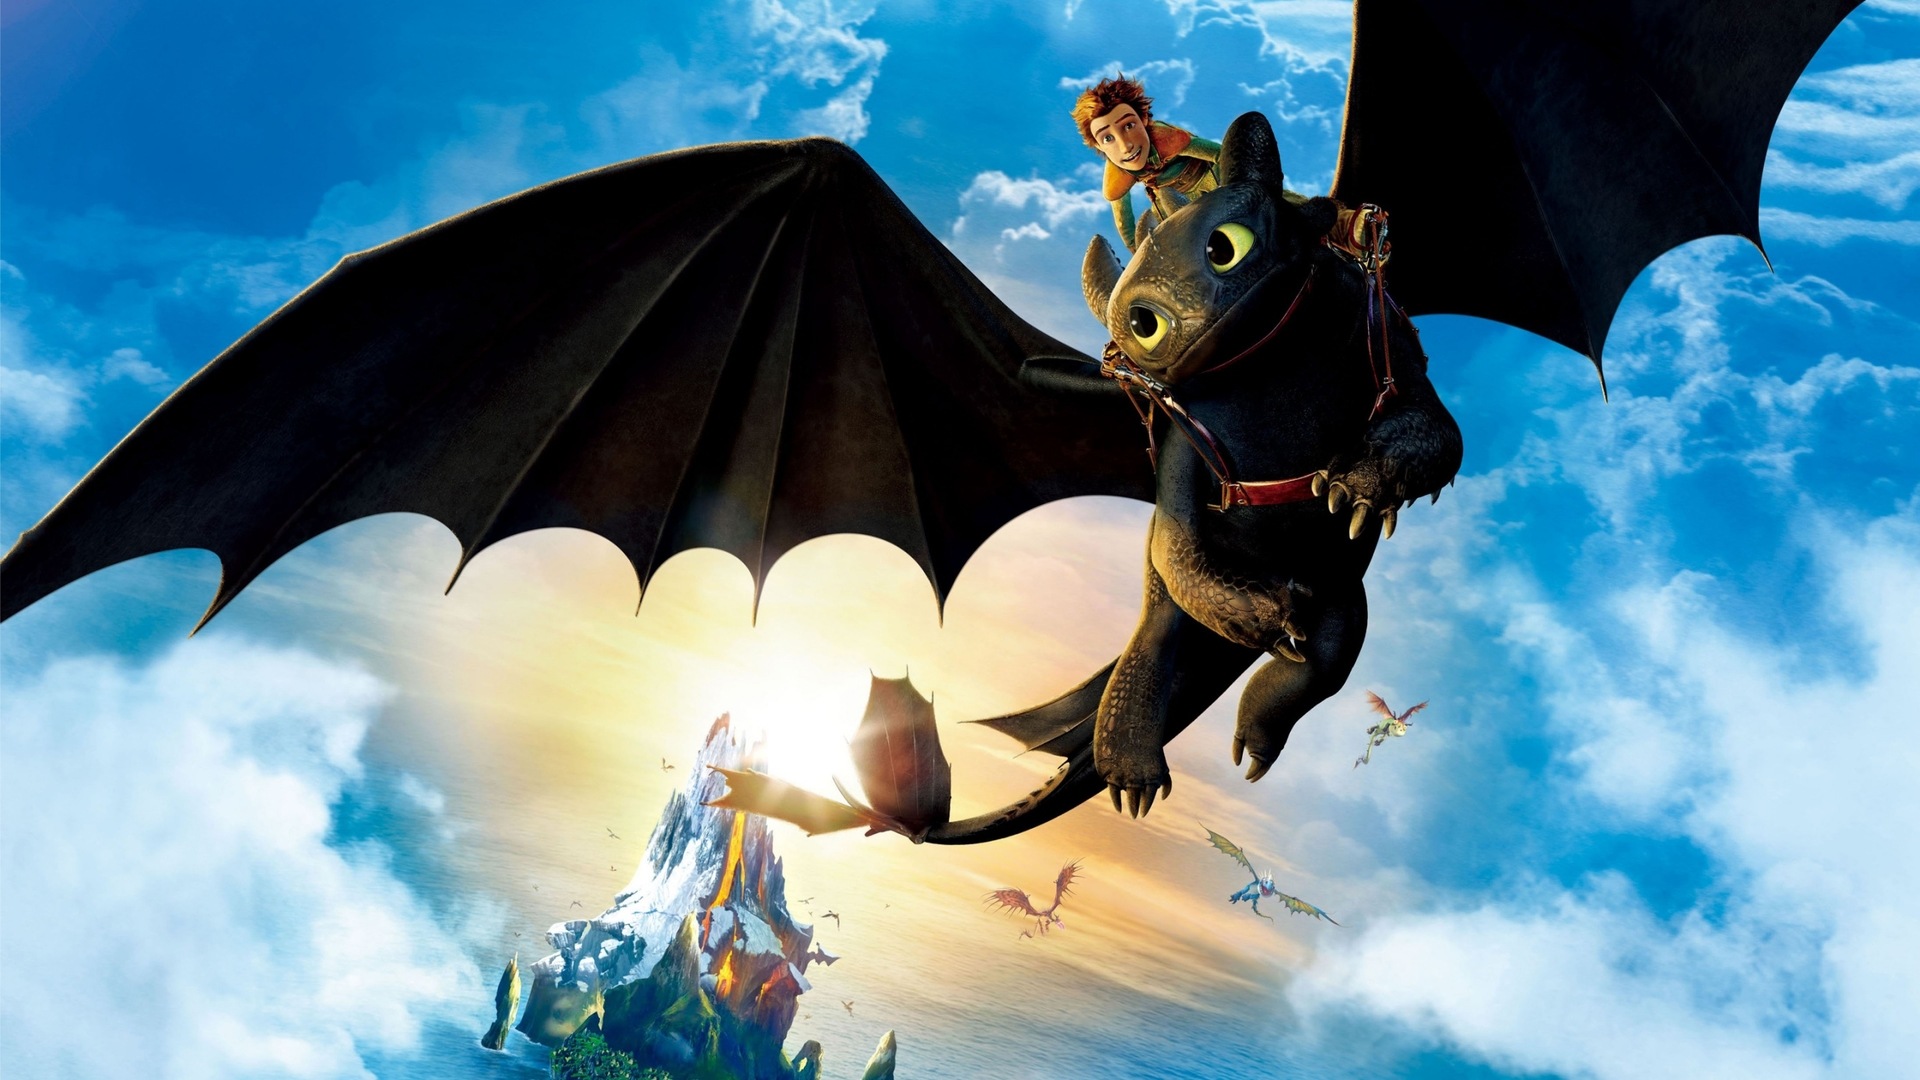 How to Train Your Dragon 2 驯龙高手2 高清壁纸1 - 1920x1080